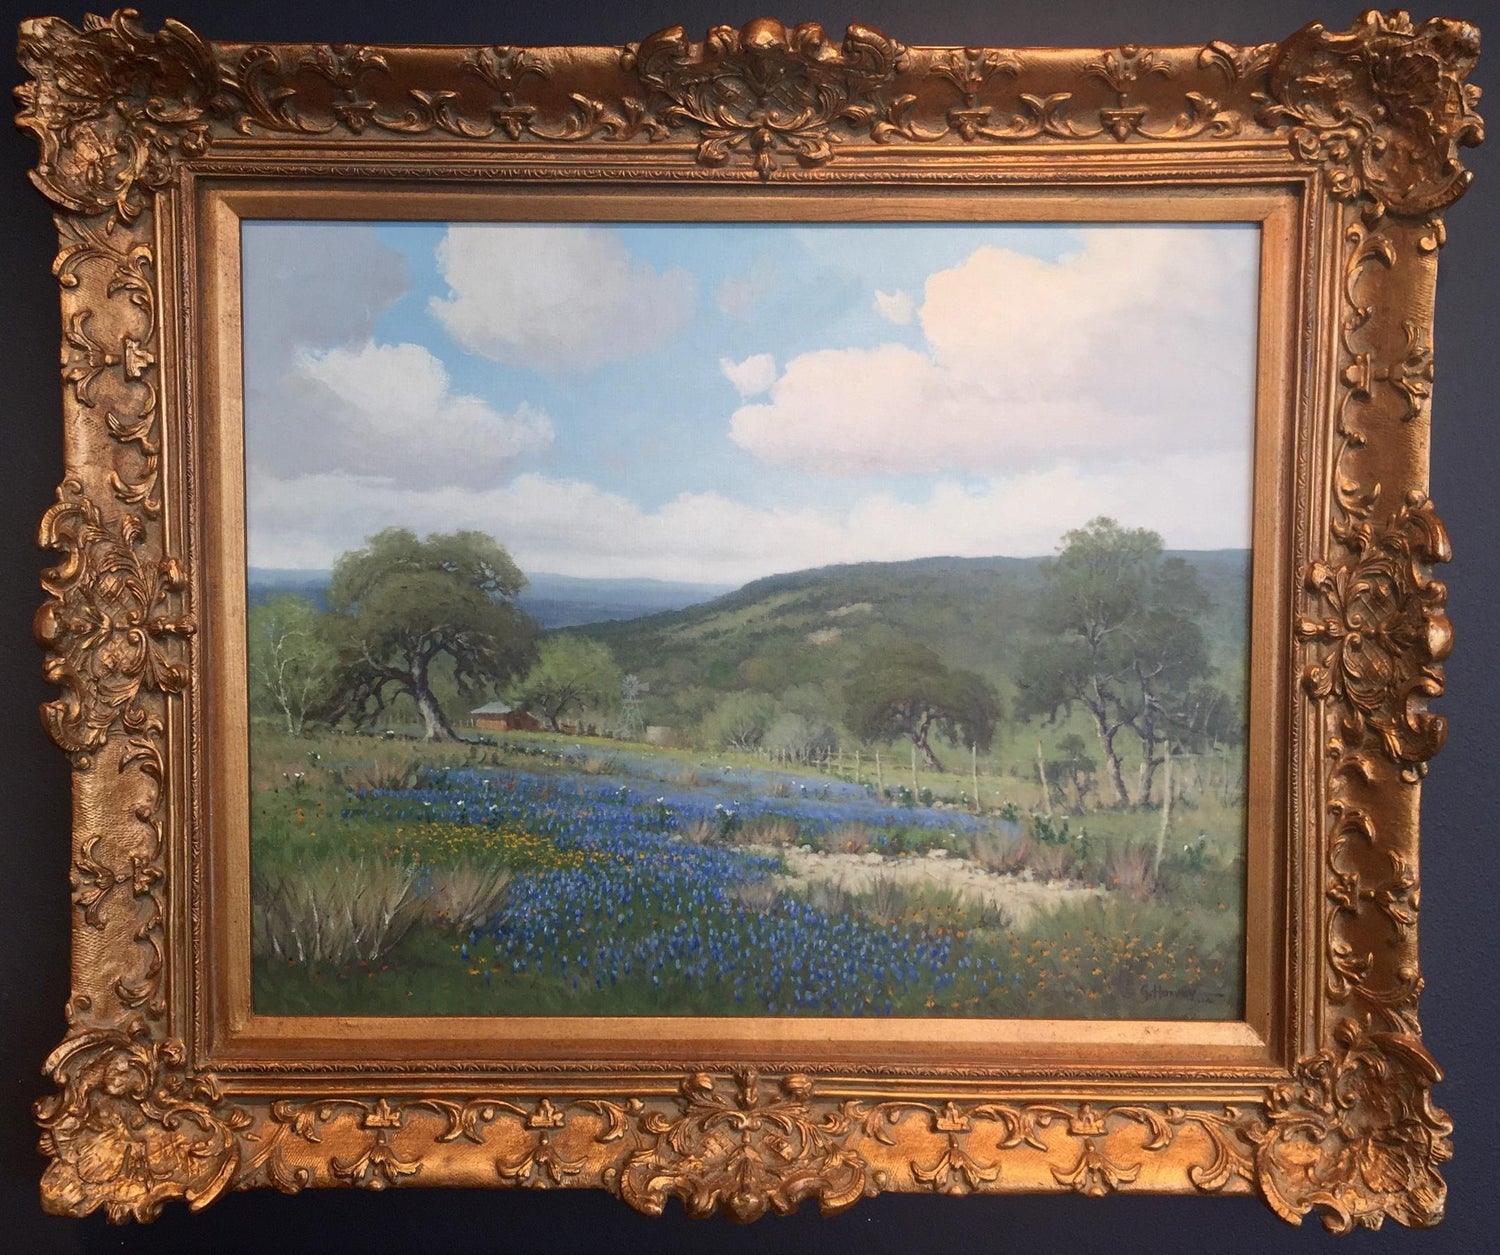 G. Harvey - "Bluebonnet Ranch" TEXAS HILL COUNTRY PAINTING Windmill, Shack,  Fenceline For Sale at 1stDibs